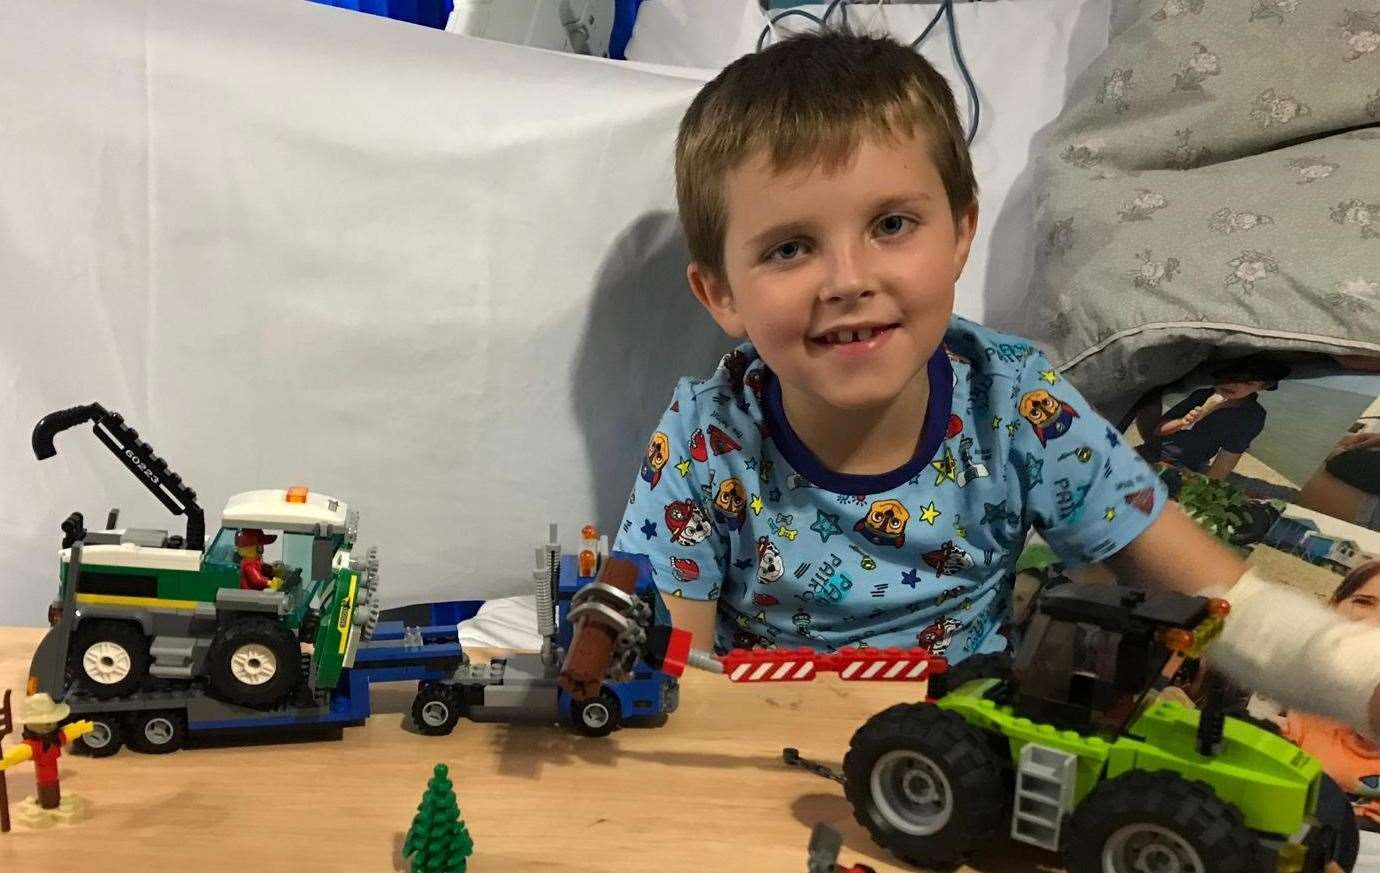 Joe Ward-Bates with Lego sets he proudly built while being treated at King's College Hospital